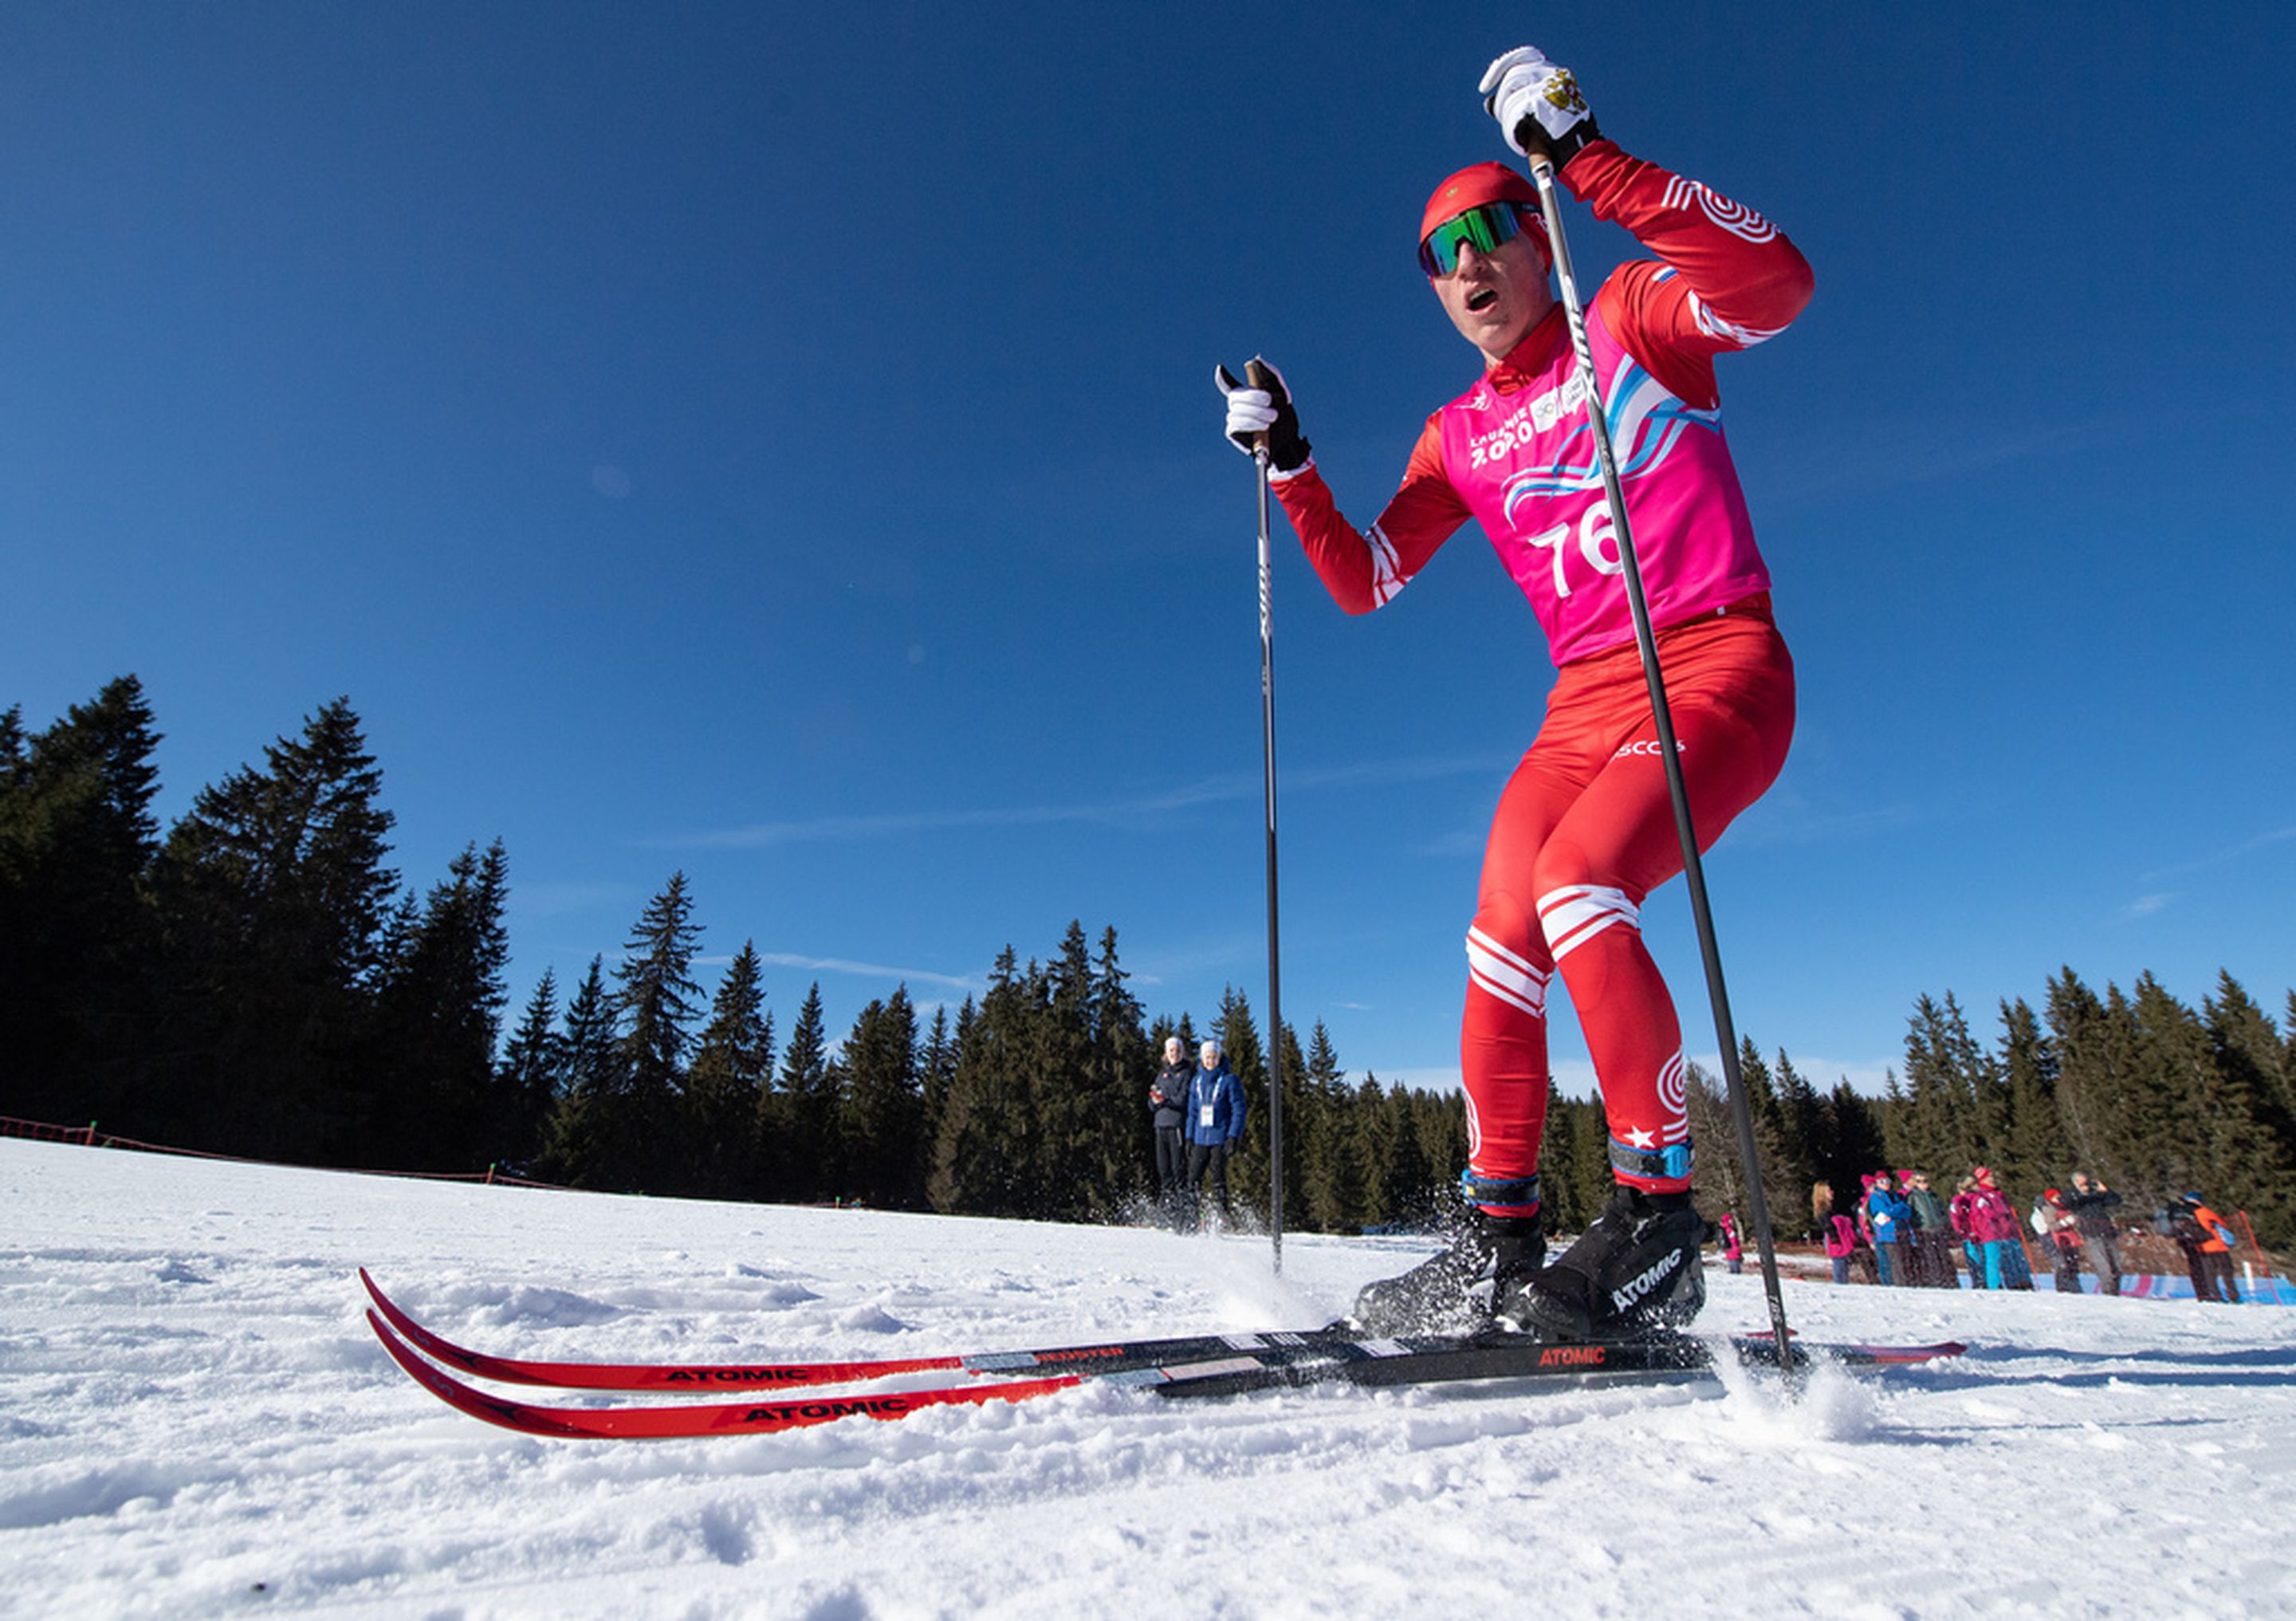 Iliya Tregubov RUS in action during the Cross-Country Skiing Men’s 10km Classic at Vallee de Joux Cross-Country Centre.. The Winter Youth Olympic Games, Lausanne, Switzerland, Tuesday 21 January 2020. Photo: OIS/Joel Marklund. Handout image supplied by OIS/IOC